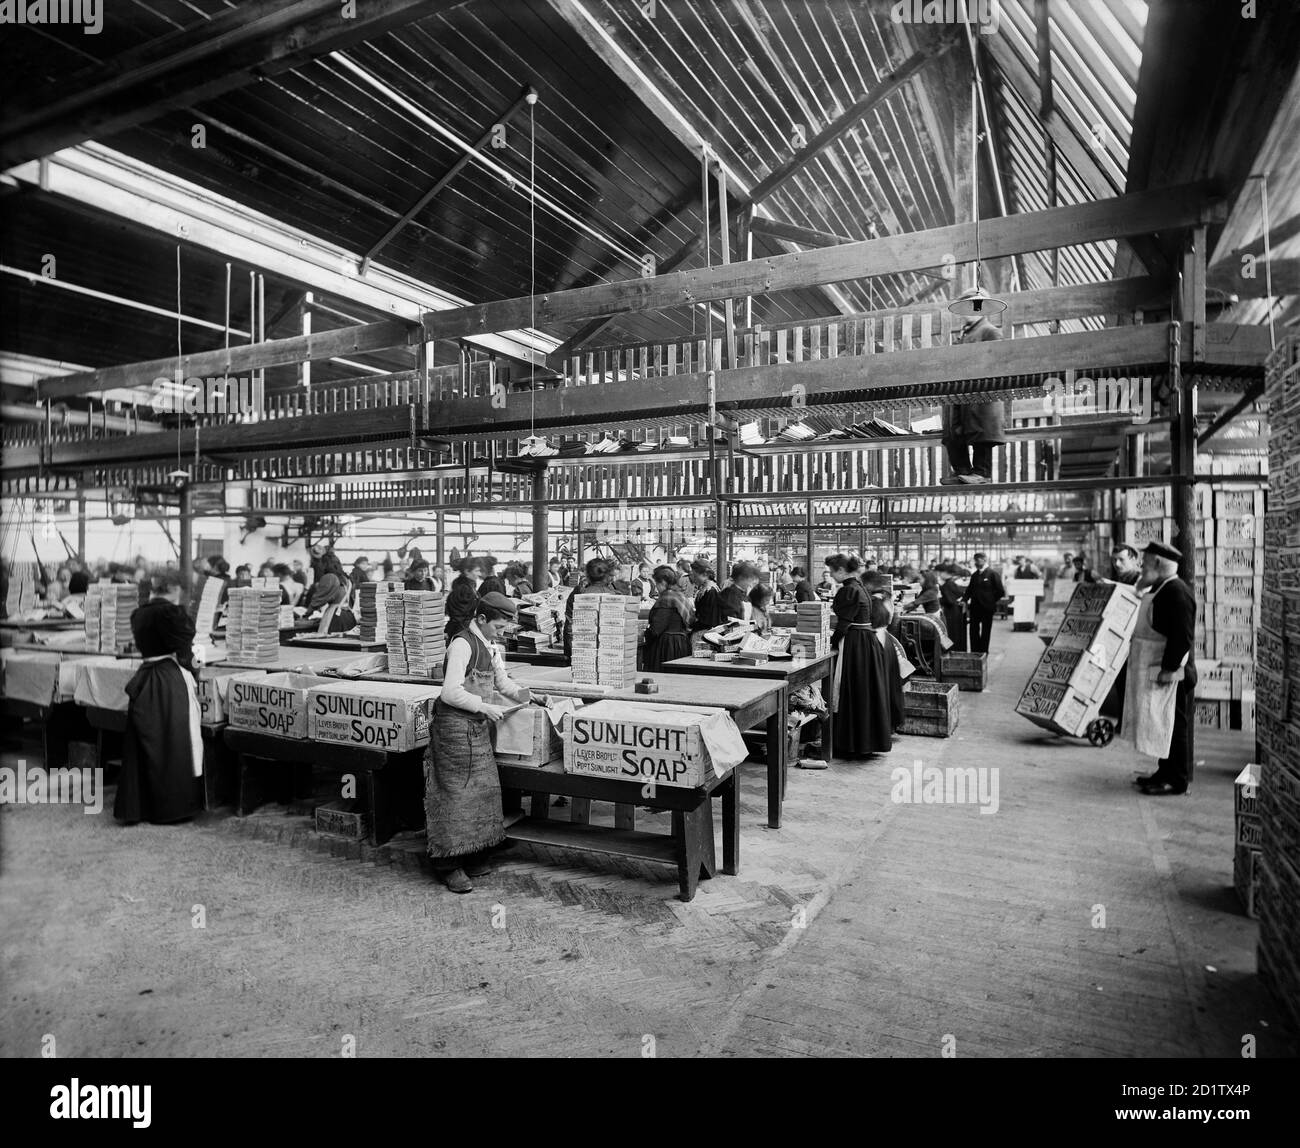 LEVER BROTHERS SUNLIGHT SOAP WORKS, Port Sunlight, Wirral, Merseyside. Interior view. Workers packing soap boxes. Photographed by Bedford Lemere & Co. in April 1897. Stock Photo